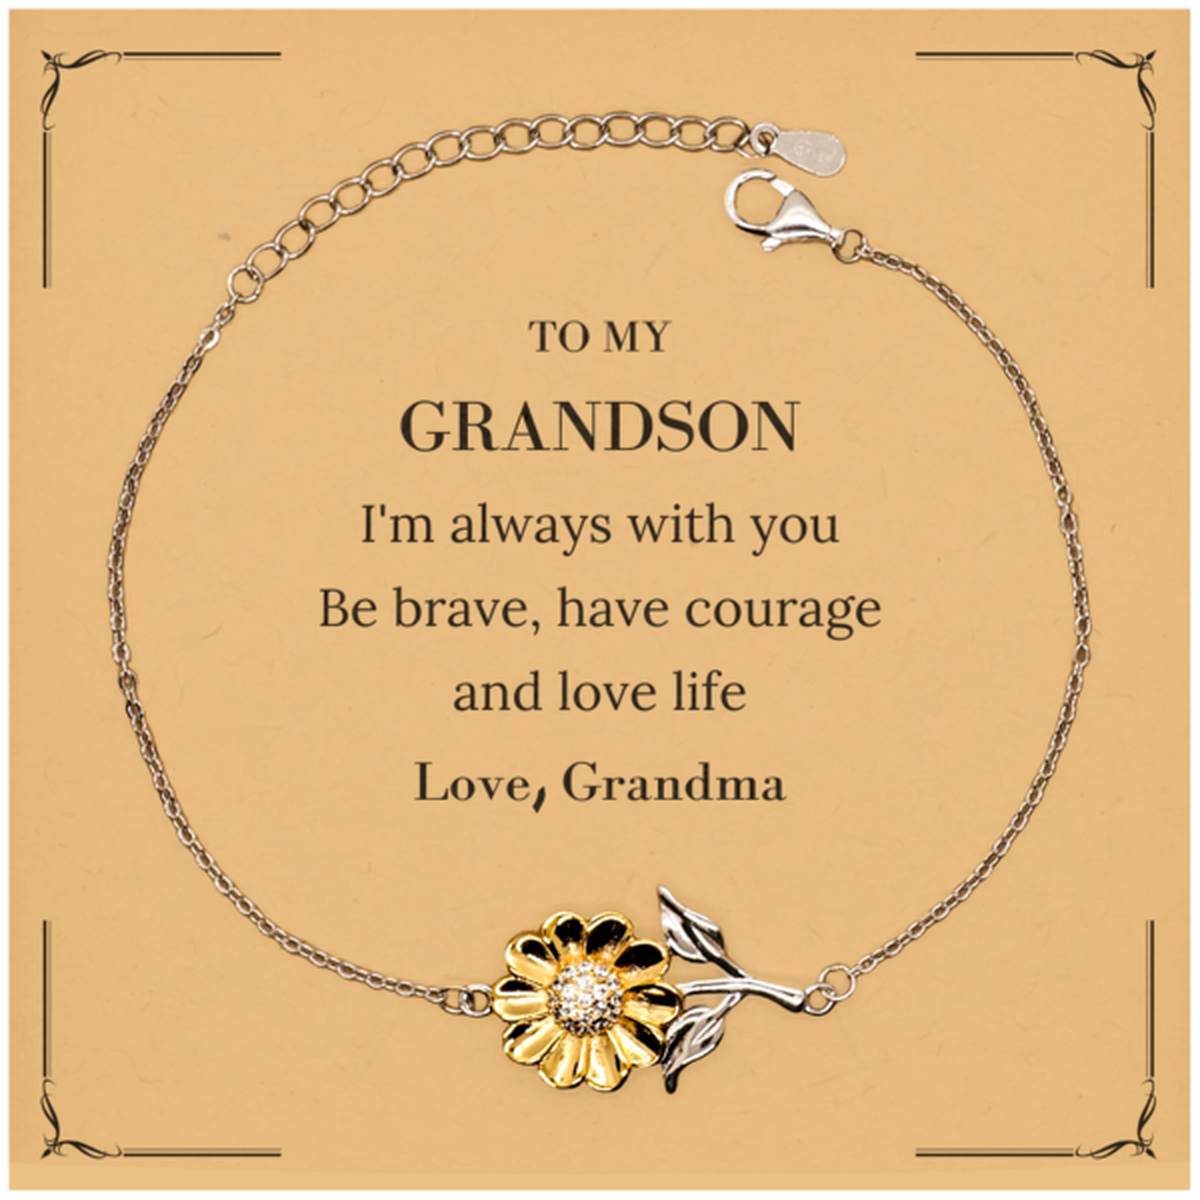 To My Grandson Gifts from Grandma, Unique Sunflower Bracelet Inspirational Christmas Birthday Graduation Gifts for Grandson I'm always with you. Be brave, have courage and love life. Love, Grandma